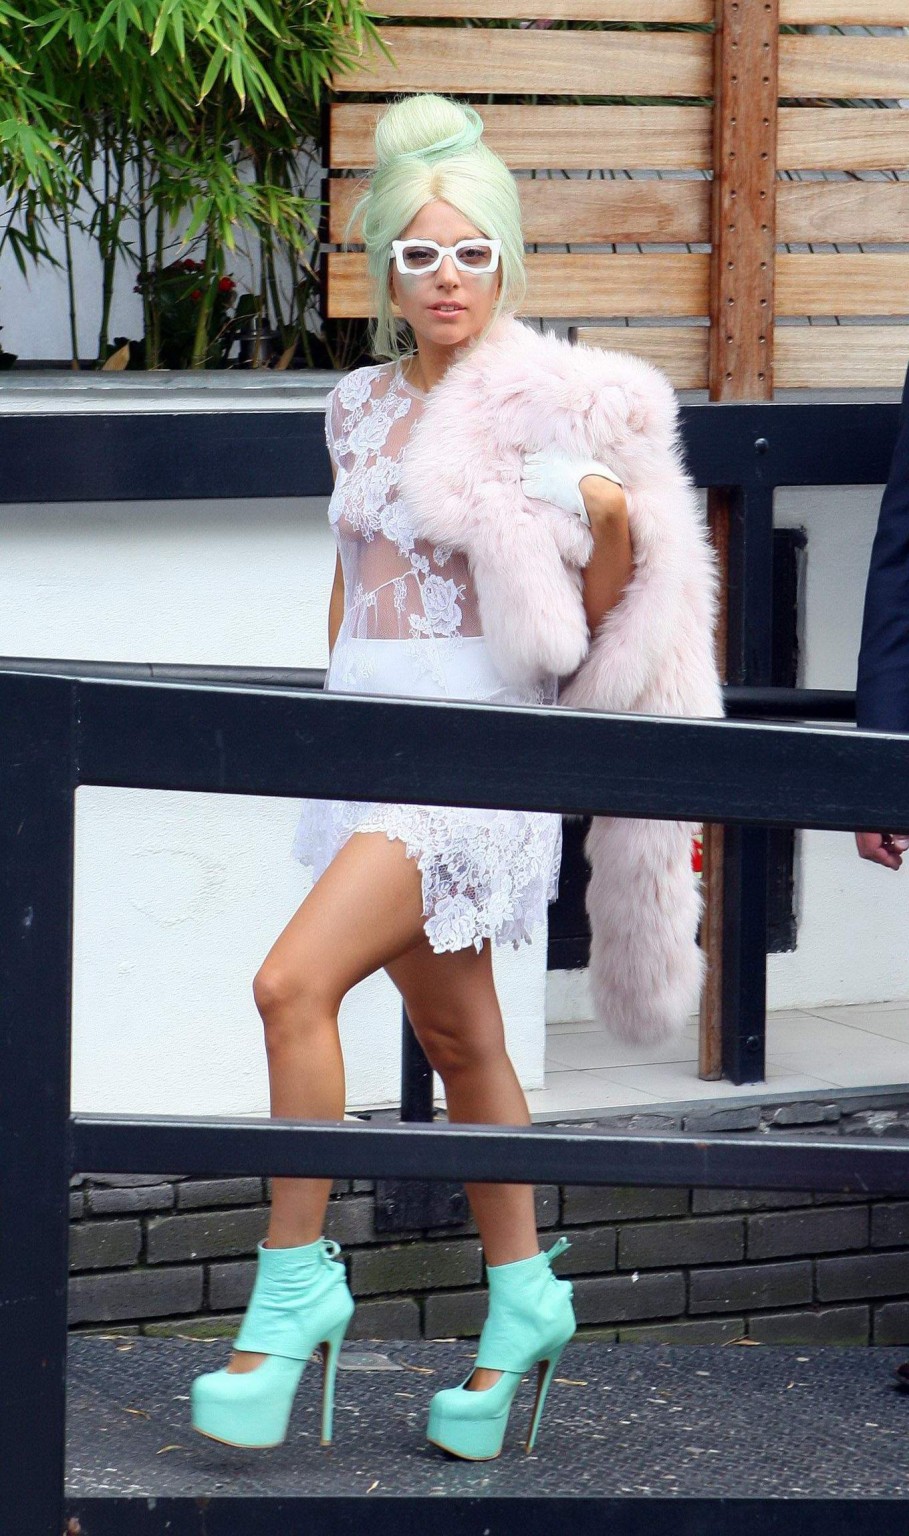 Lady Gaga braless in see-through lace dress heading to to ITV Studios in London #75286298